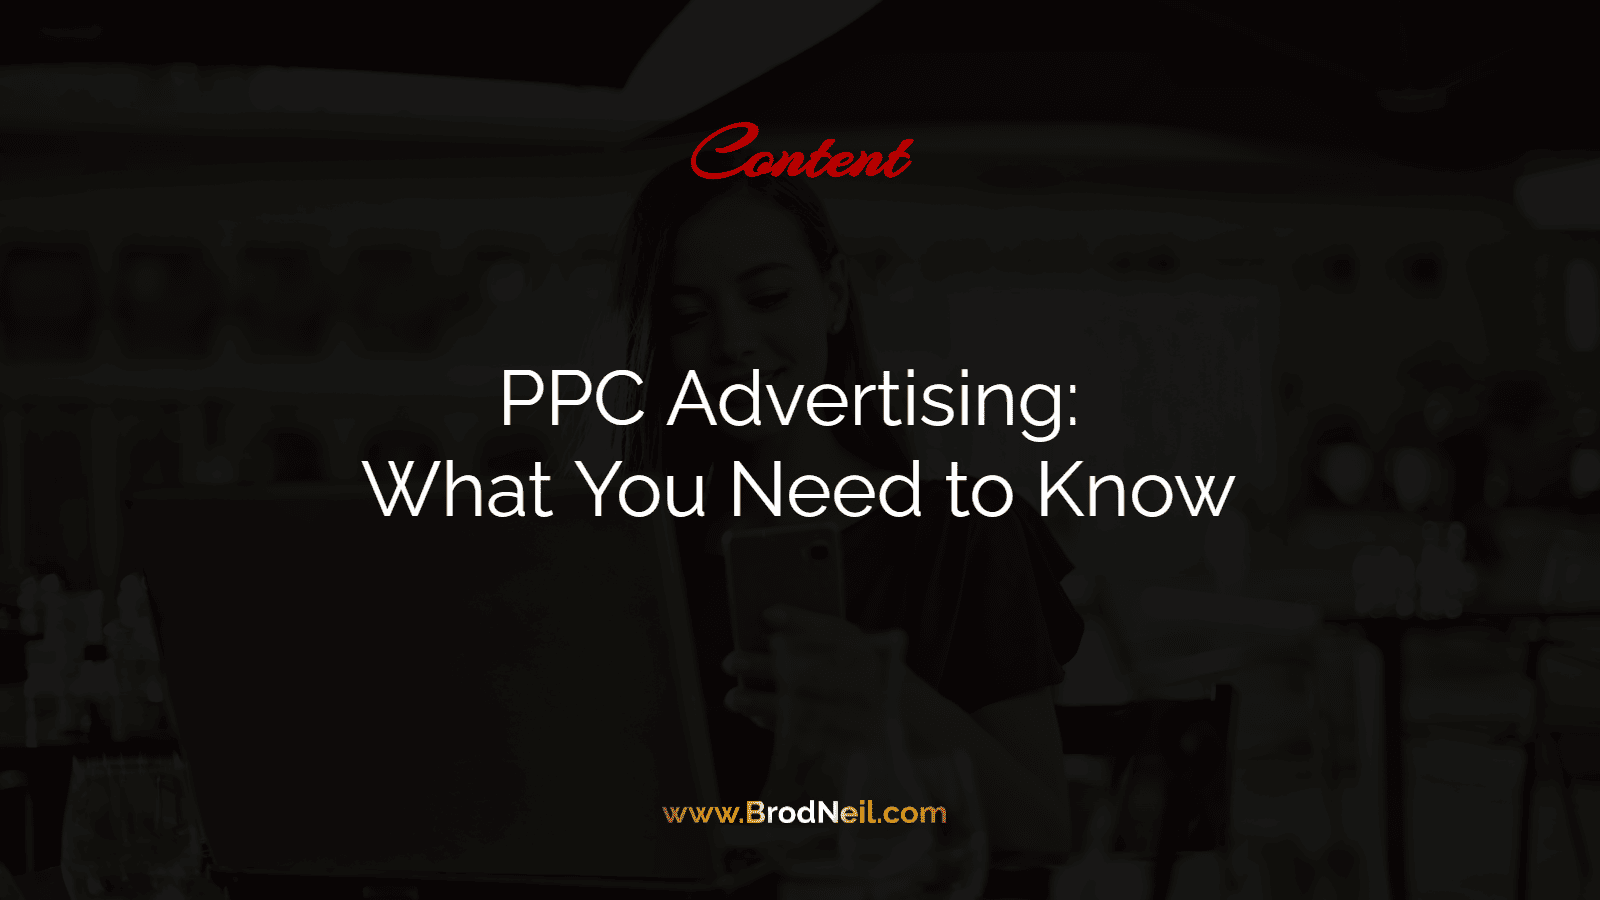 PPC Advertising: What You Need to Know